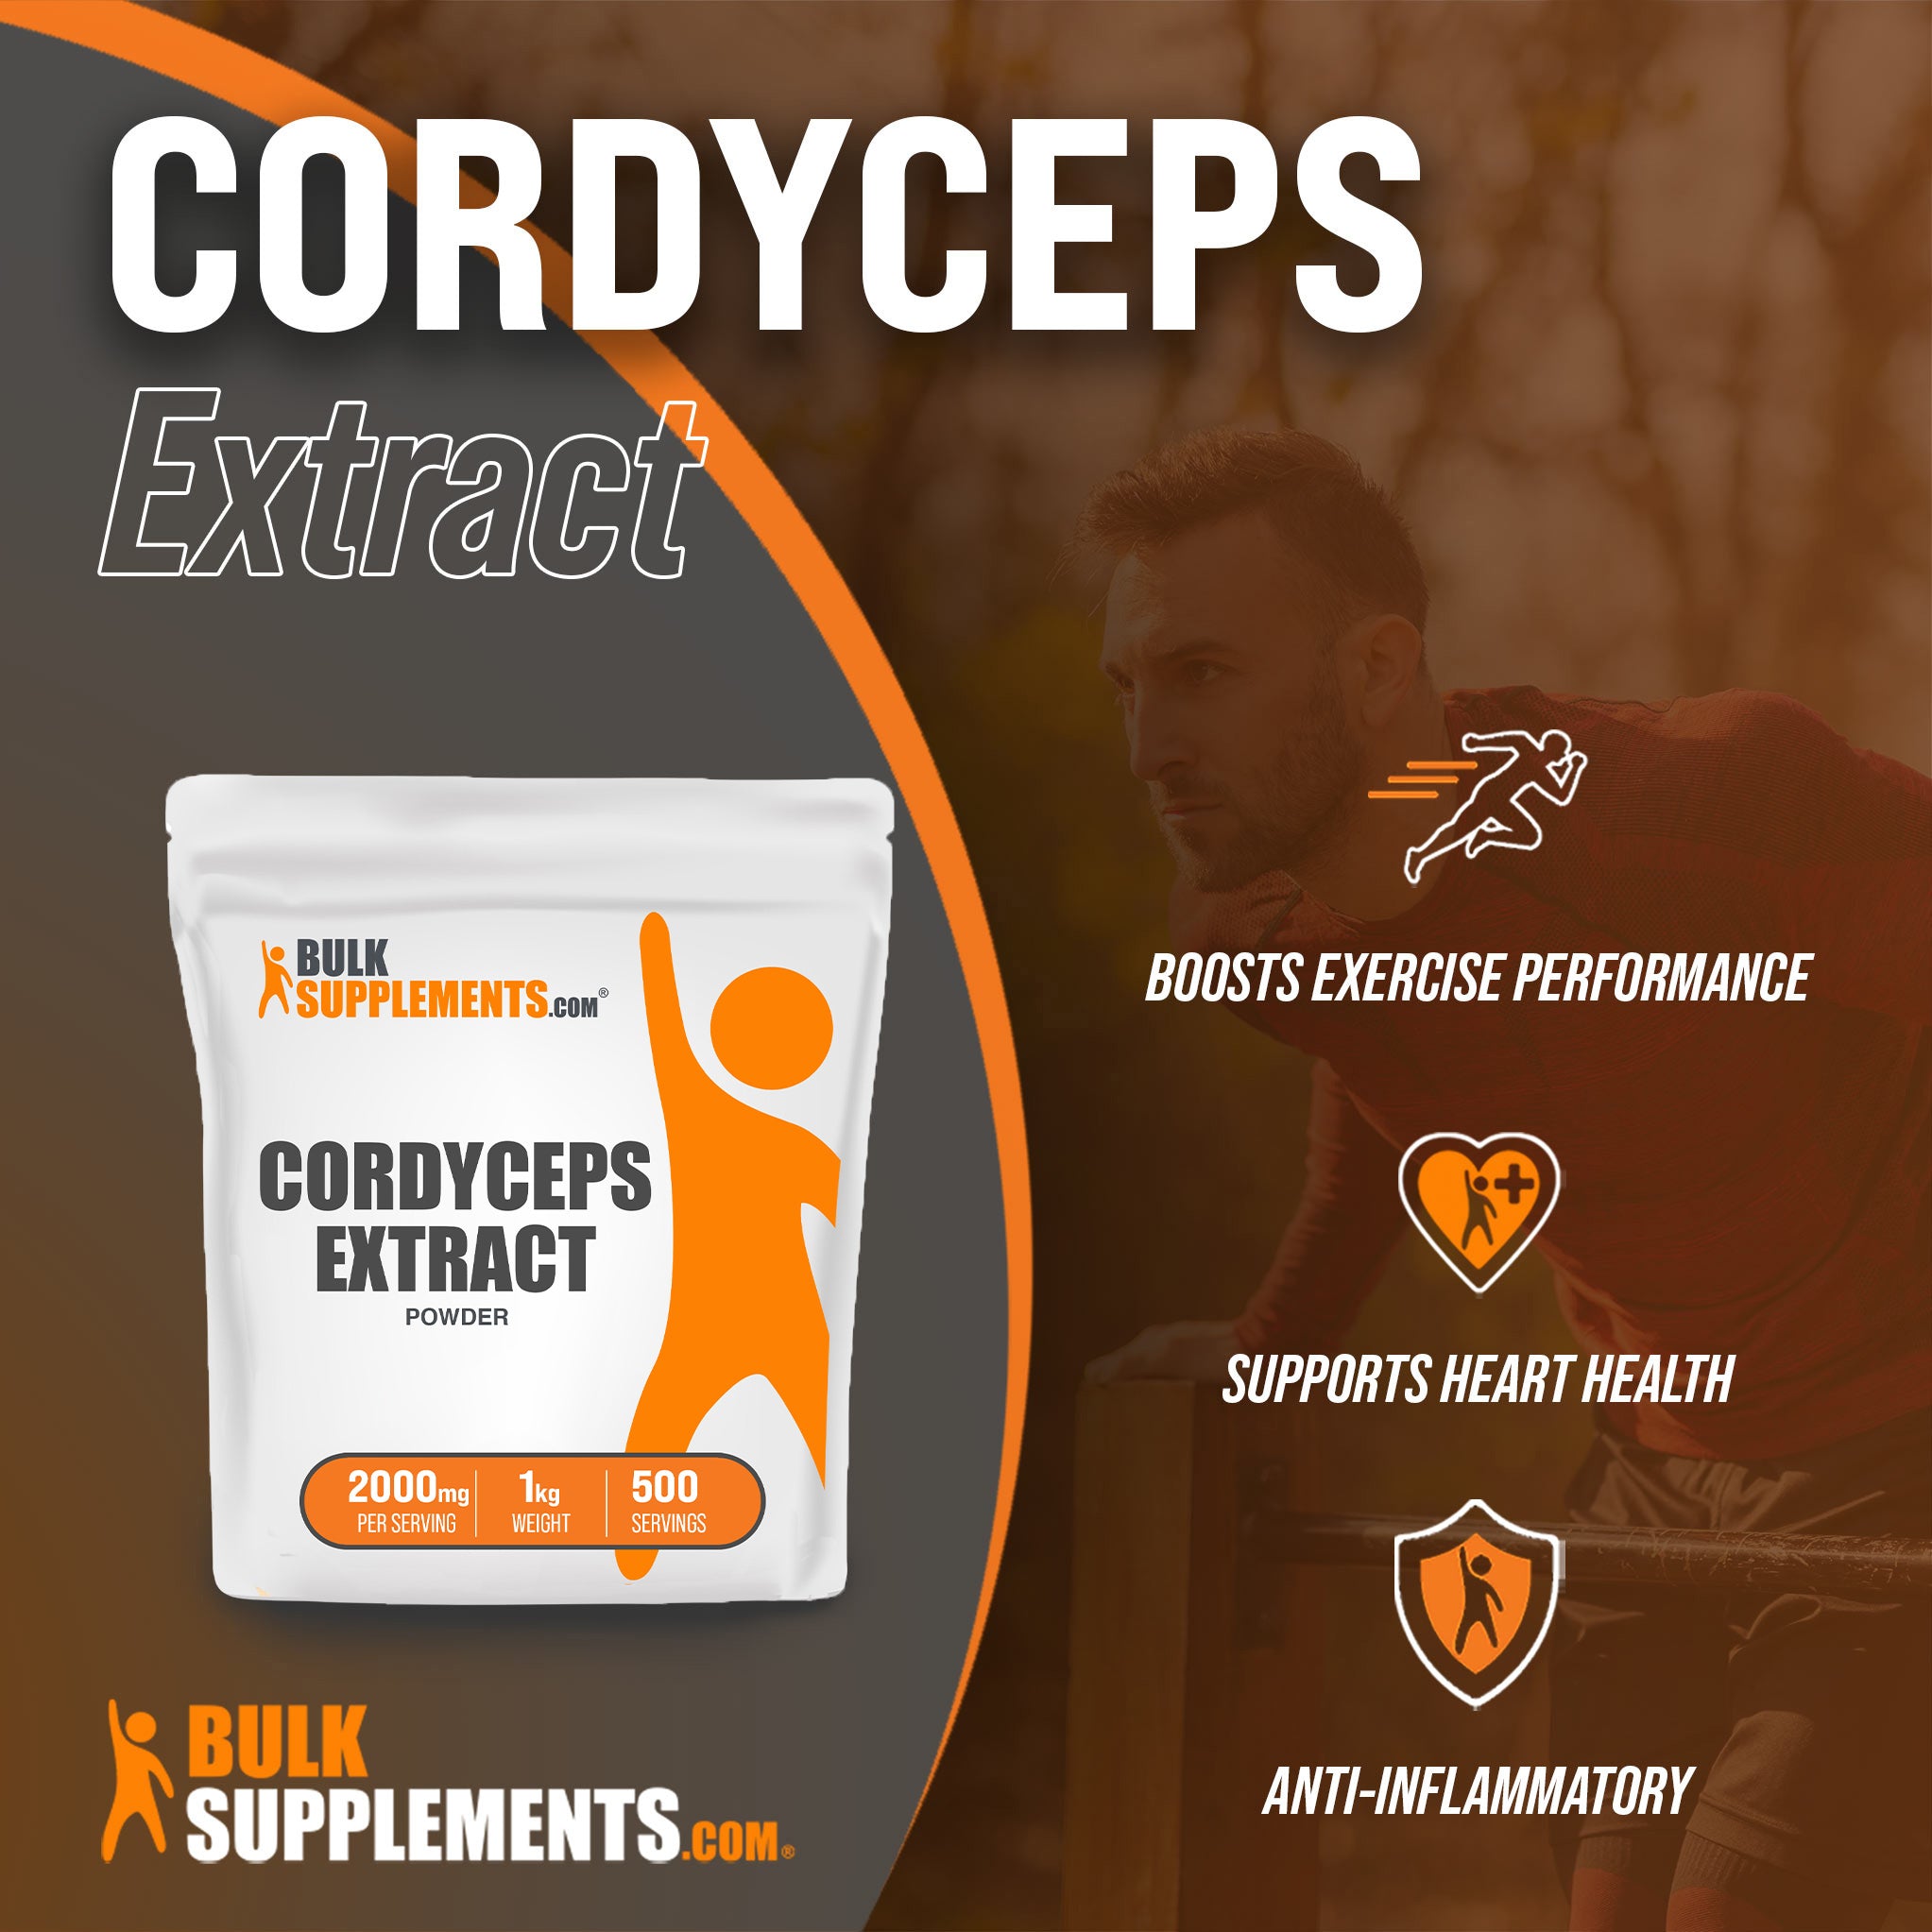 Benefits of Cordyceps; boosts exercise performance, supports heart health, anti-inflammatory